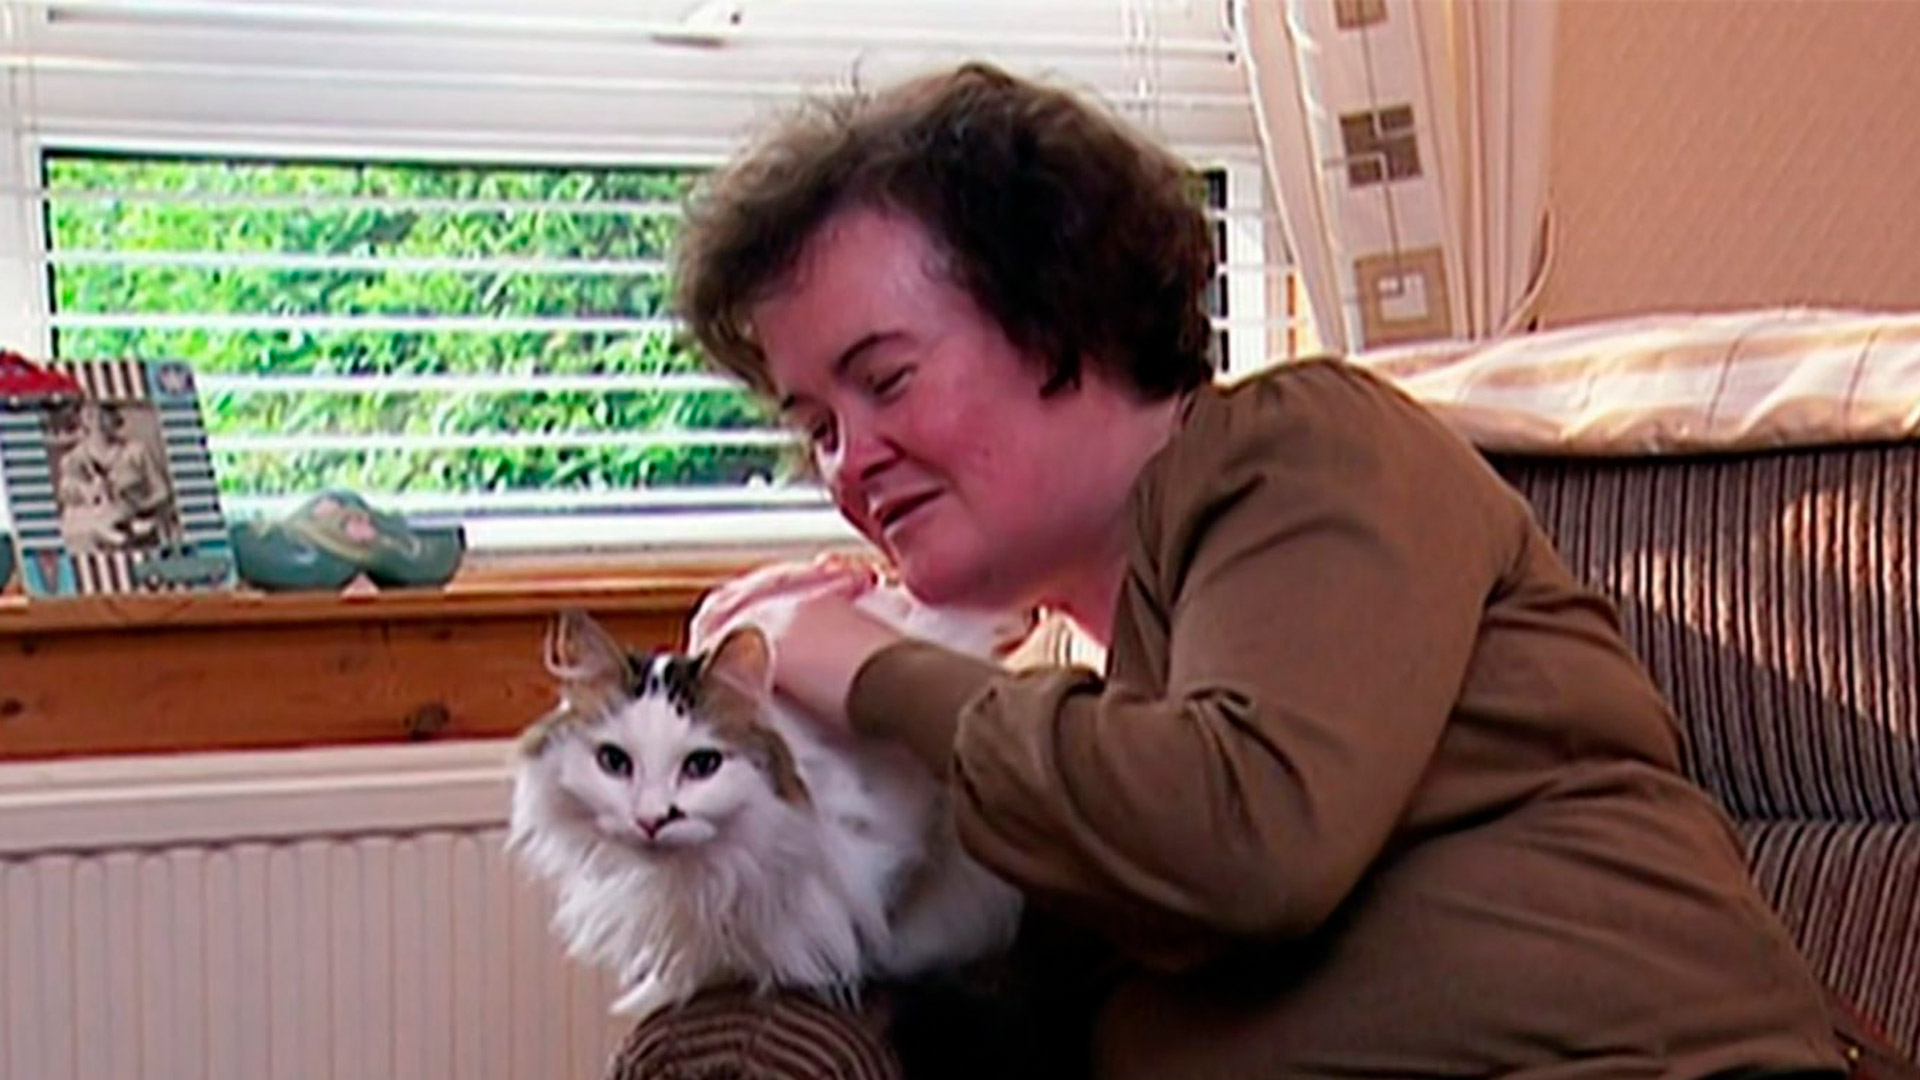 For years she lived accompanied by her cat Pebbles